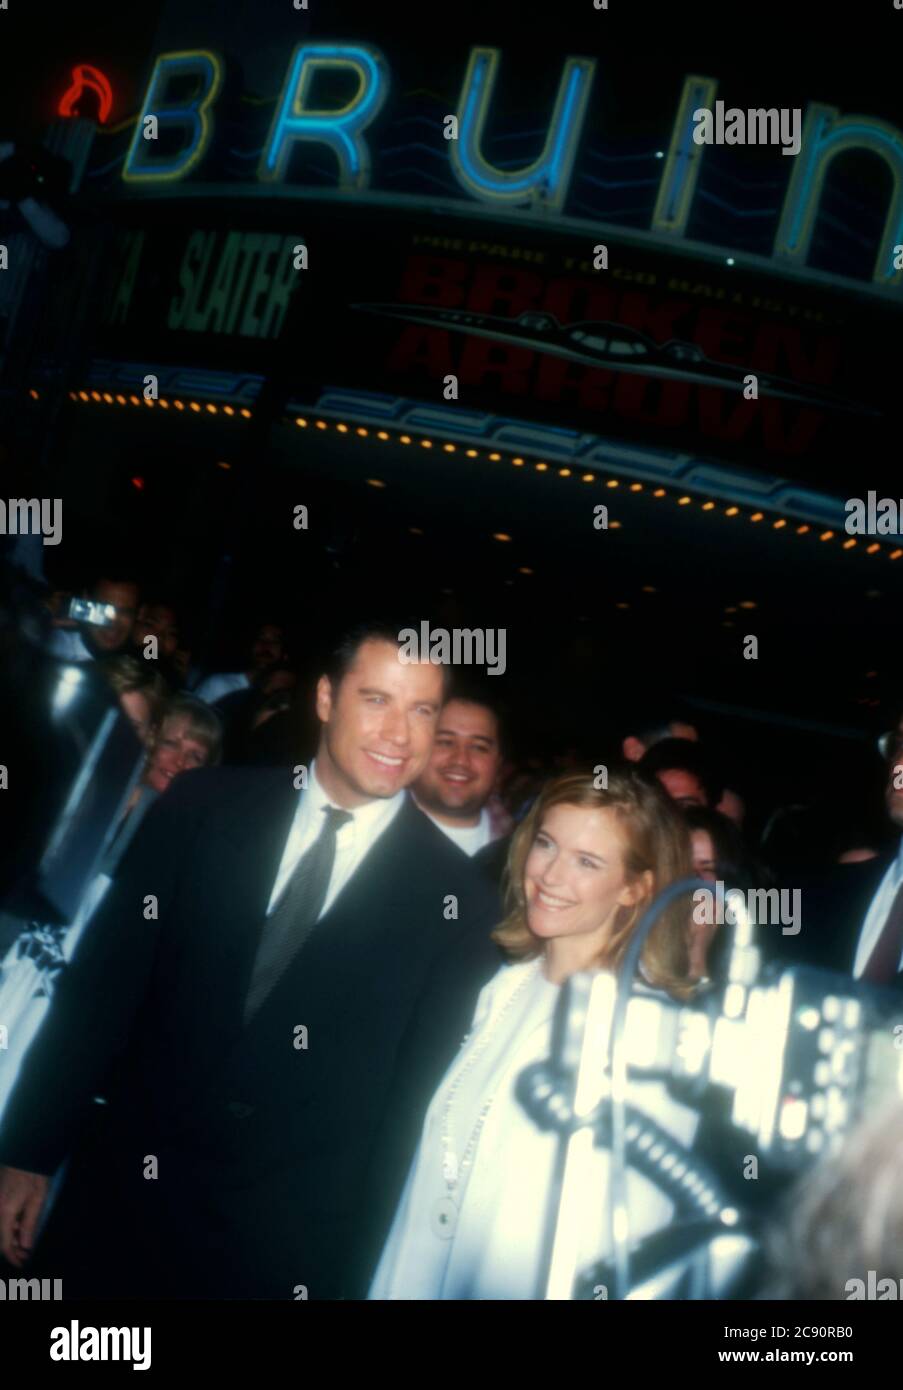 Westwood, California, USA 5th February 1996 Actor John Travolta and actress Kelly Preston attend 20th Century Fox' 'Broken Arrow' Premiere on February 5, 1996 at Mann Village Theatre in Westwood, California, USA. Photo by Barry King/Alamy Stock Photo Stock Photo